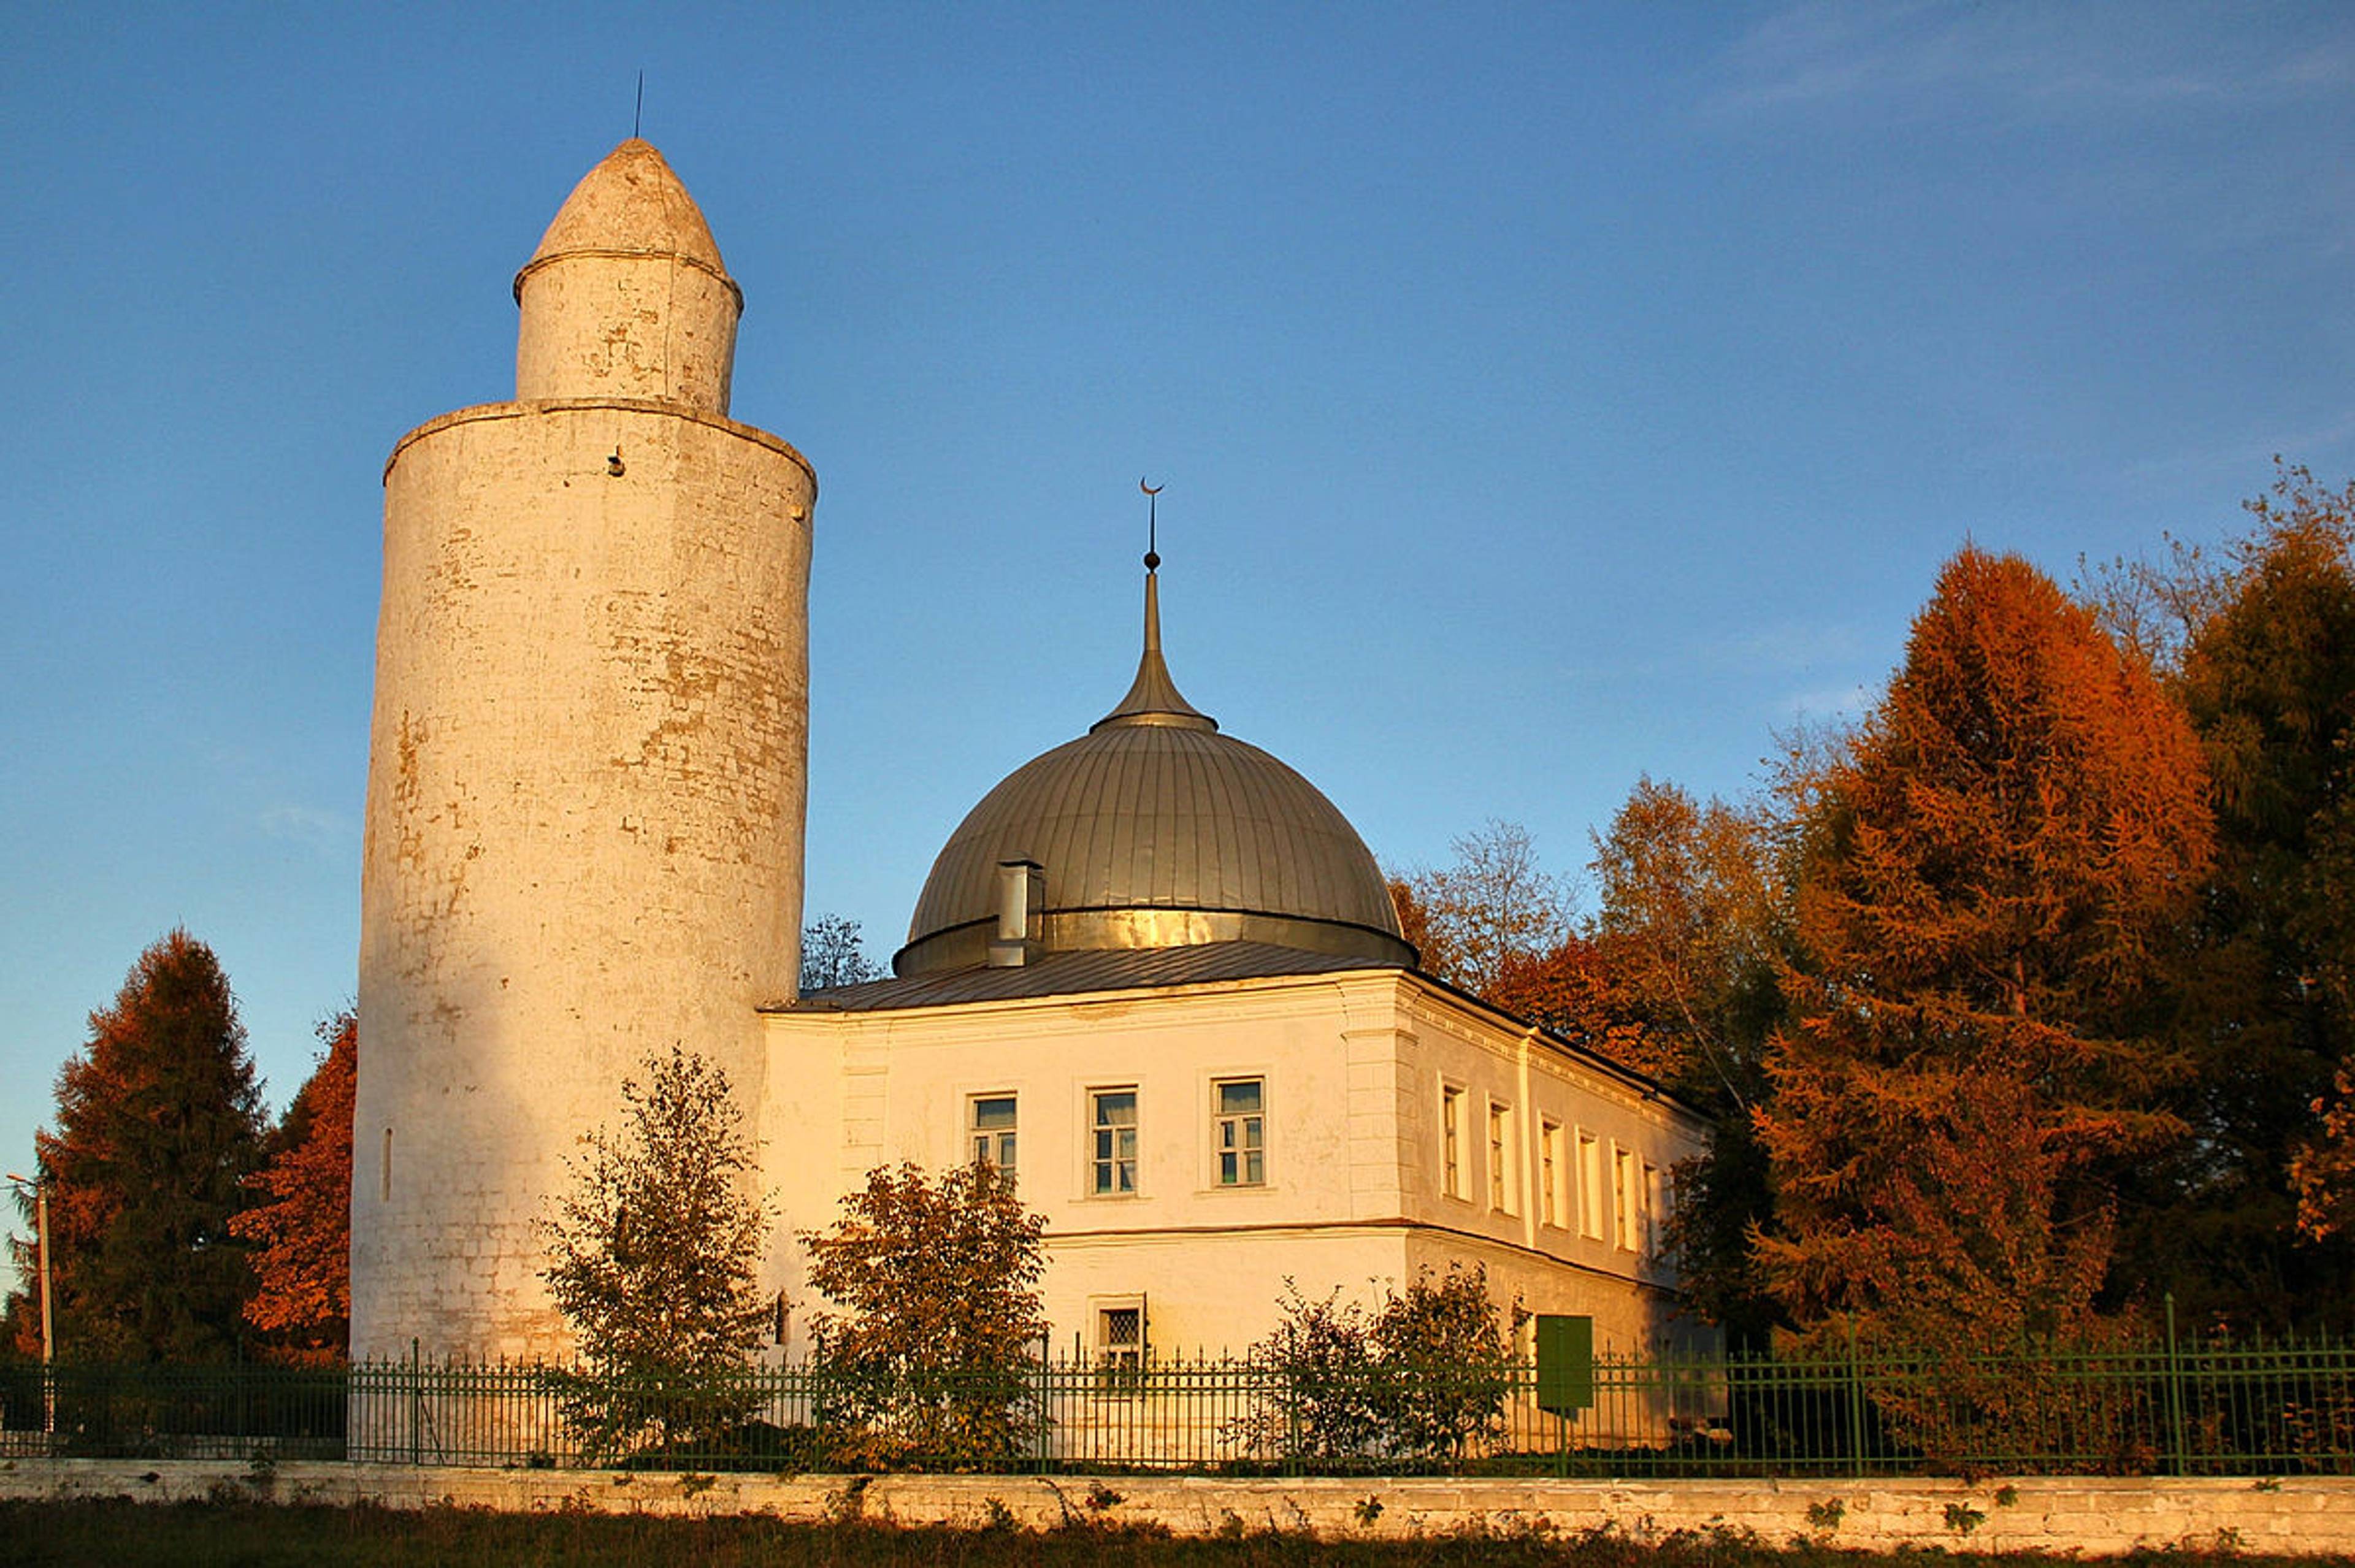 Kasimov Historical and Cultural Museum-Reserve, Khan Mosque